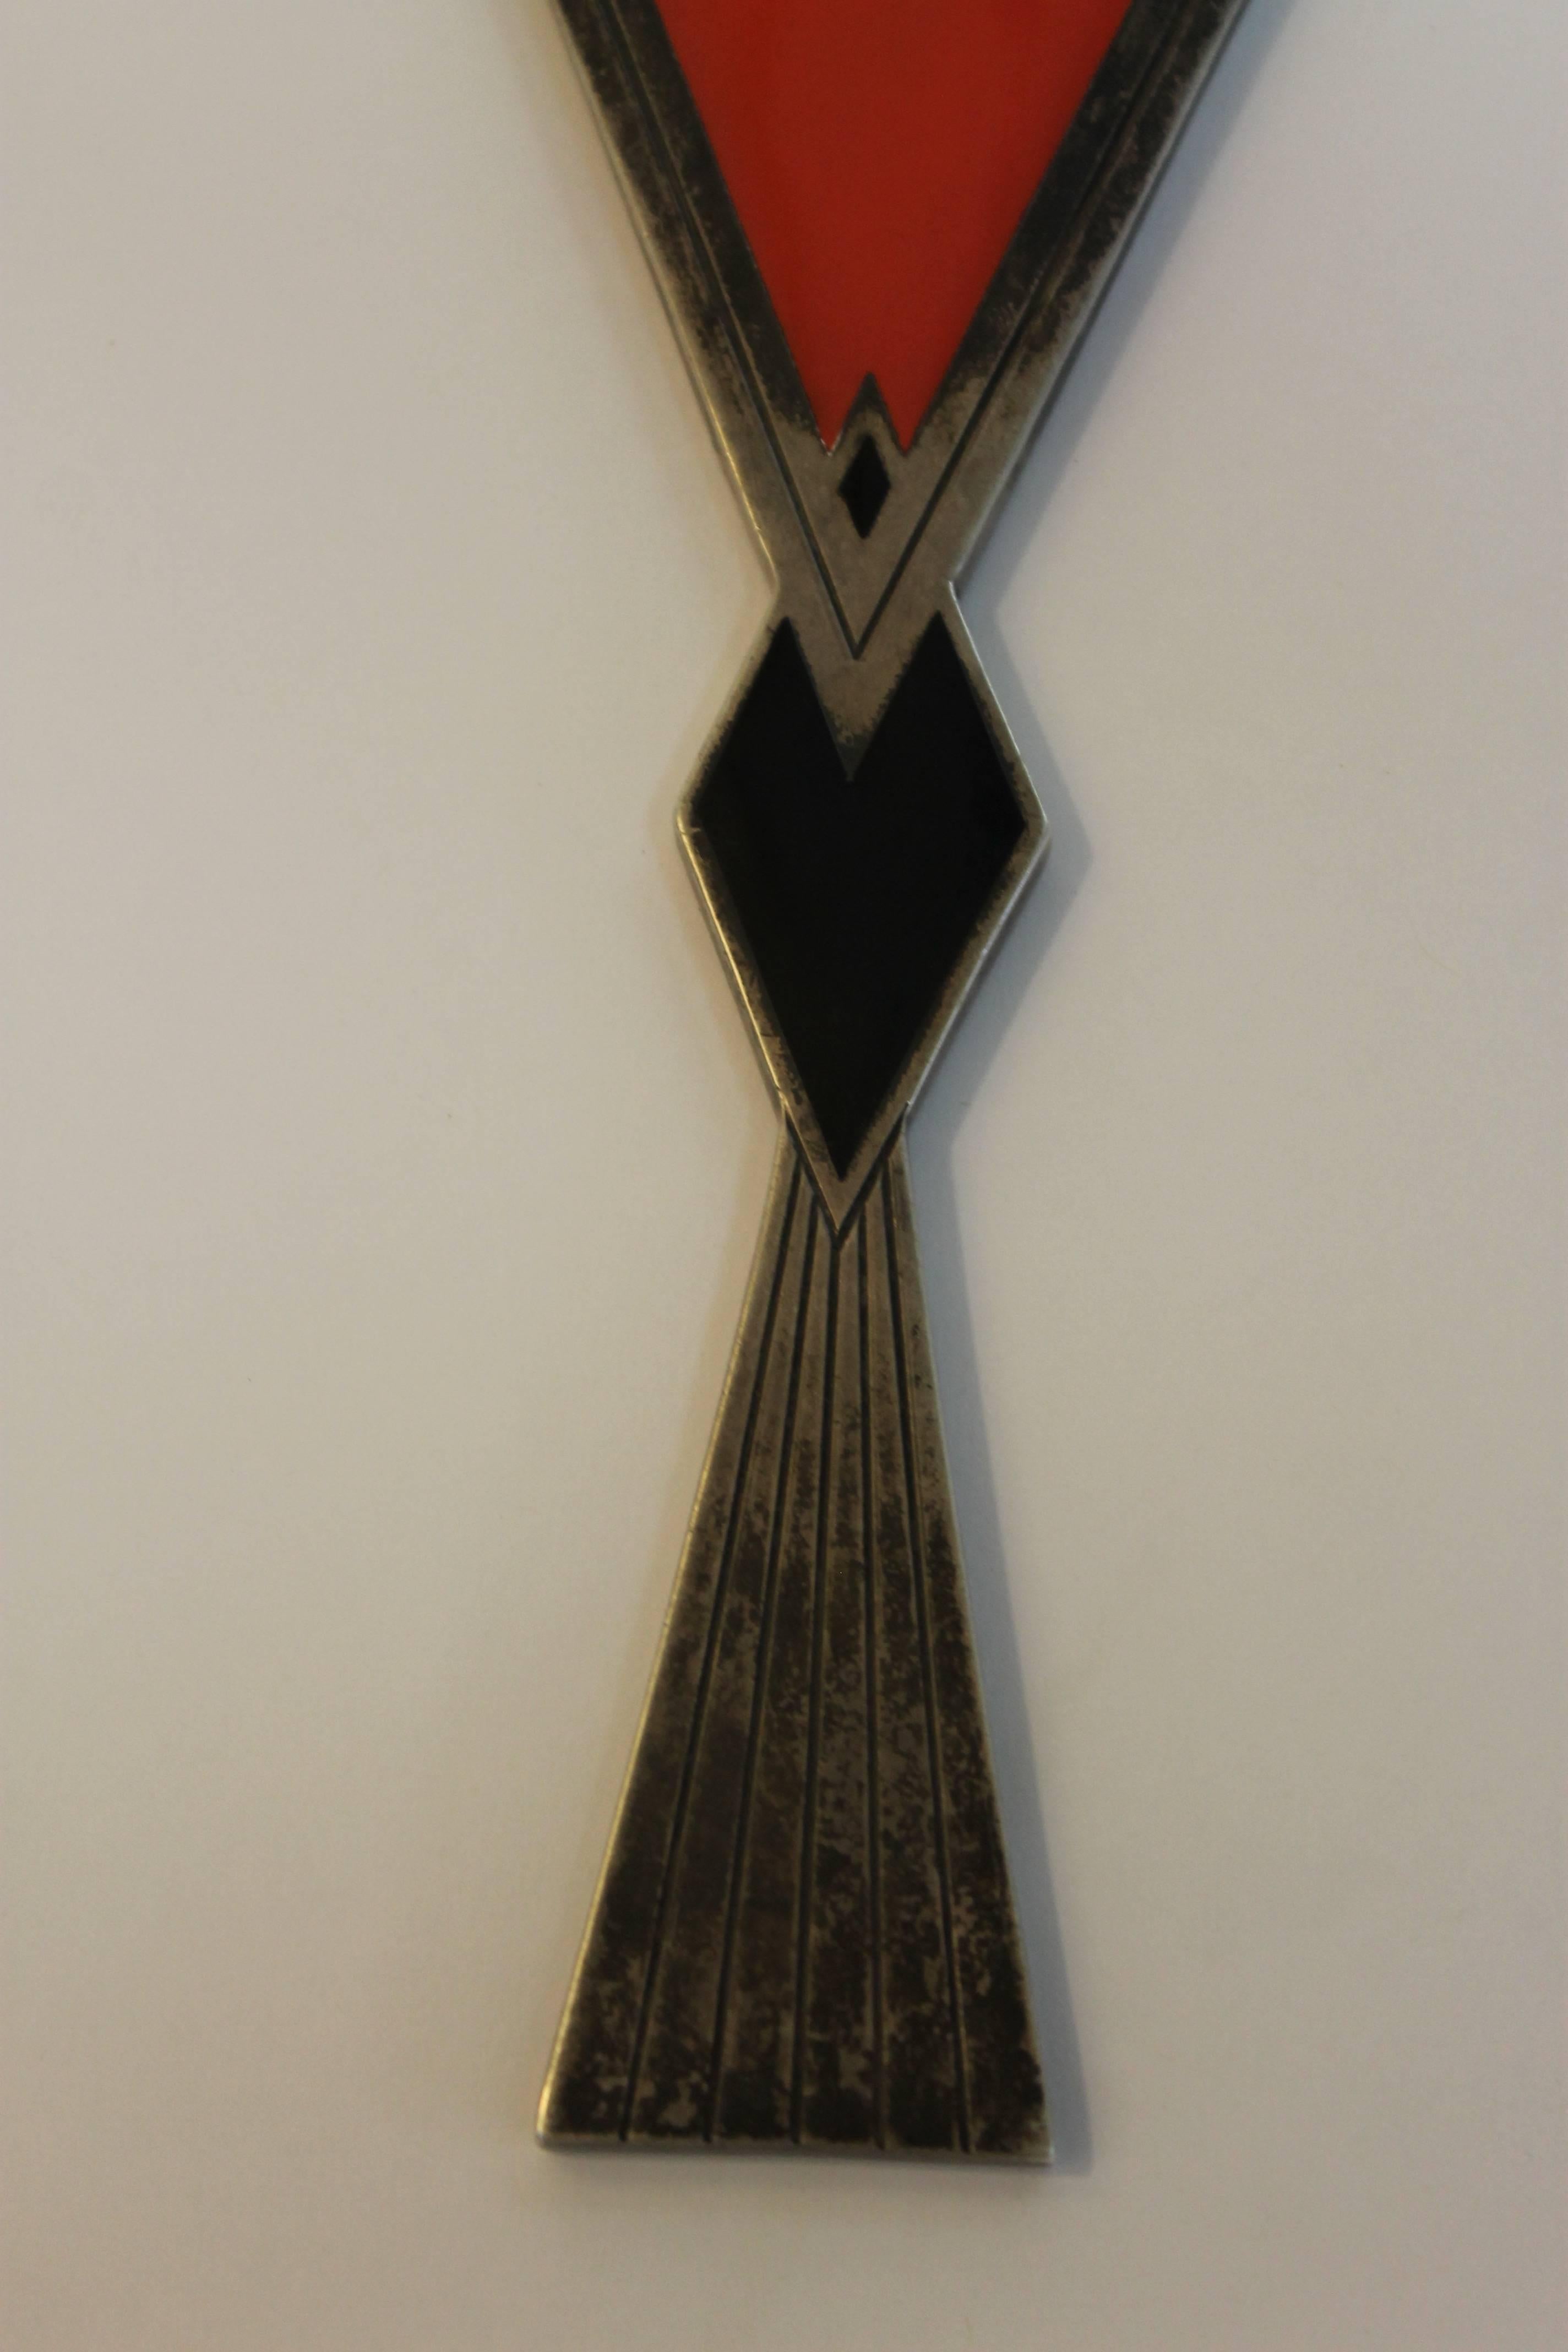 A sterling silver hand mirror in the Art Deco style with coral-red and black enameling and a beveled triangular mirror, circa late 1920s, we believe this design to be the work of Elsa Tennhardt but we have seen no other examples. Clearly marked